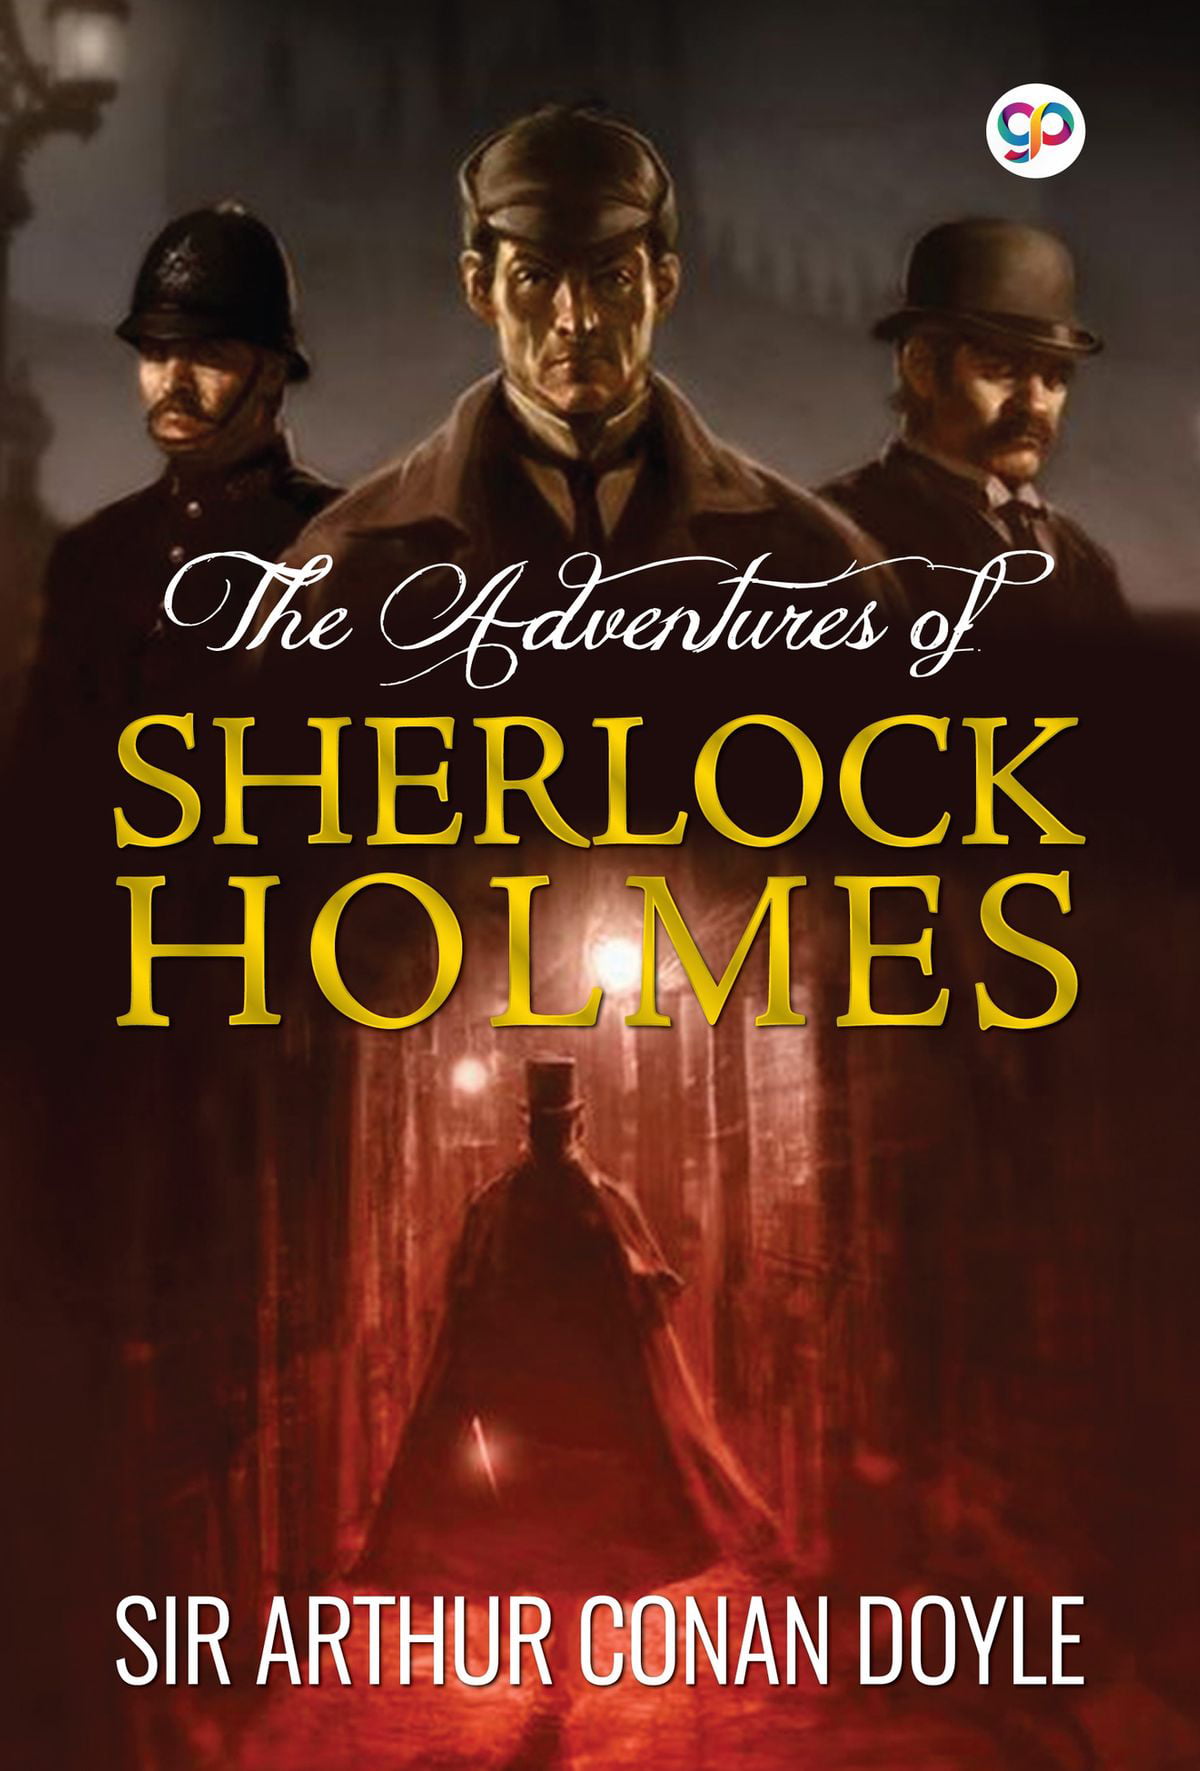 adventure of sherlock holmes book review